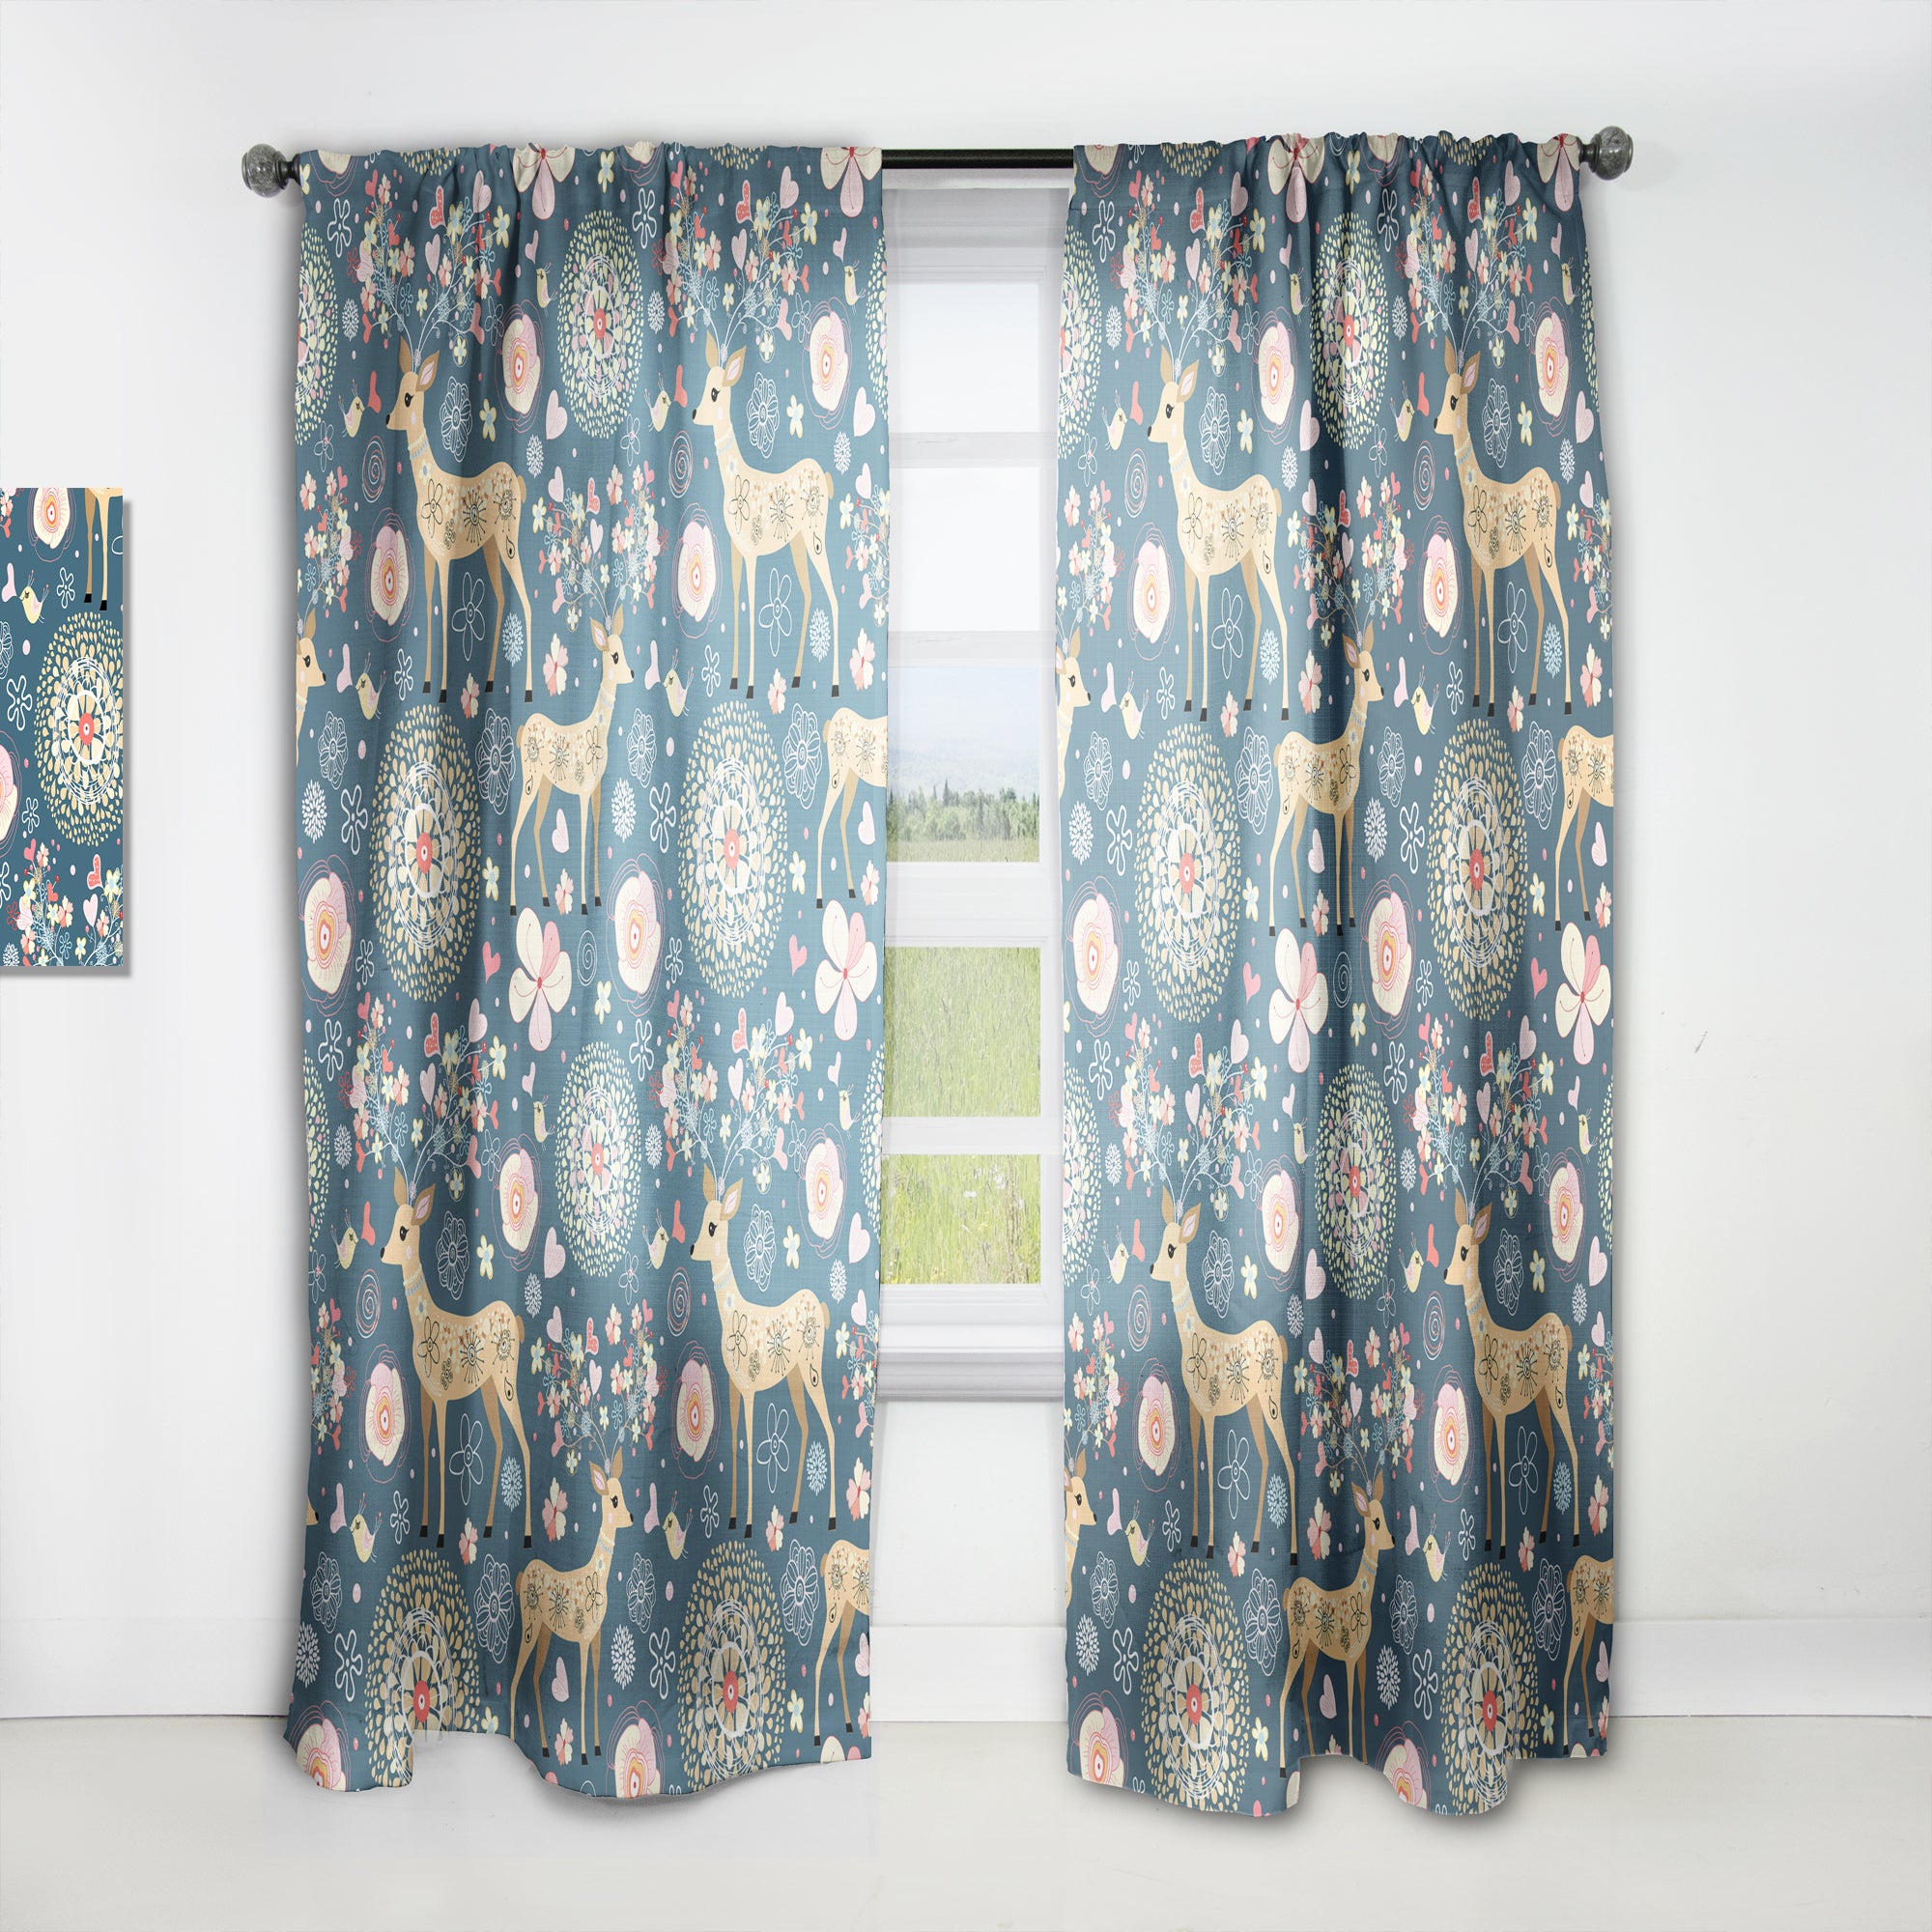 Designart 'Deer with Flowers and Hearts Antlers' Floral Curtain Panel